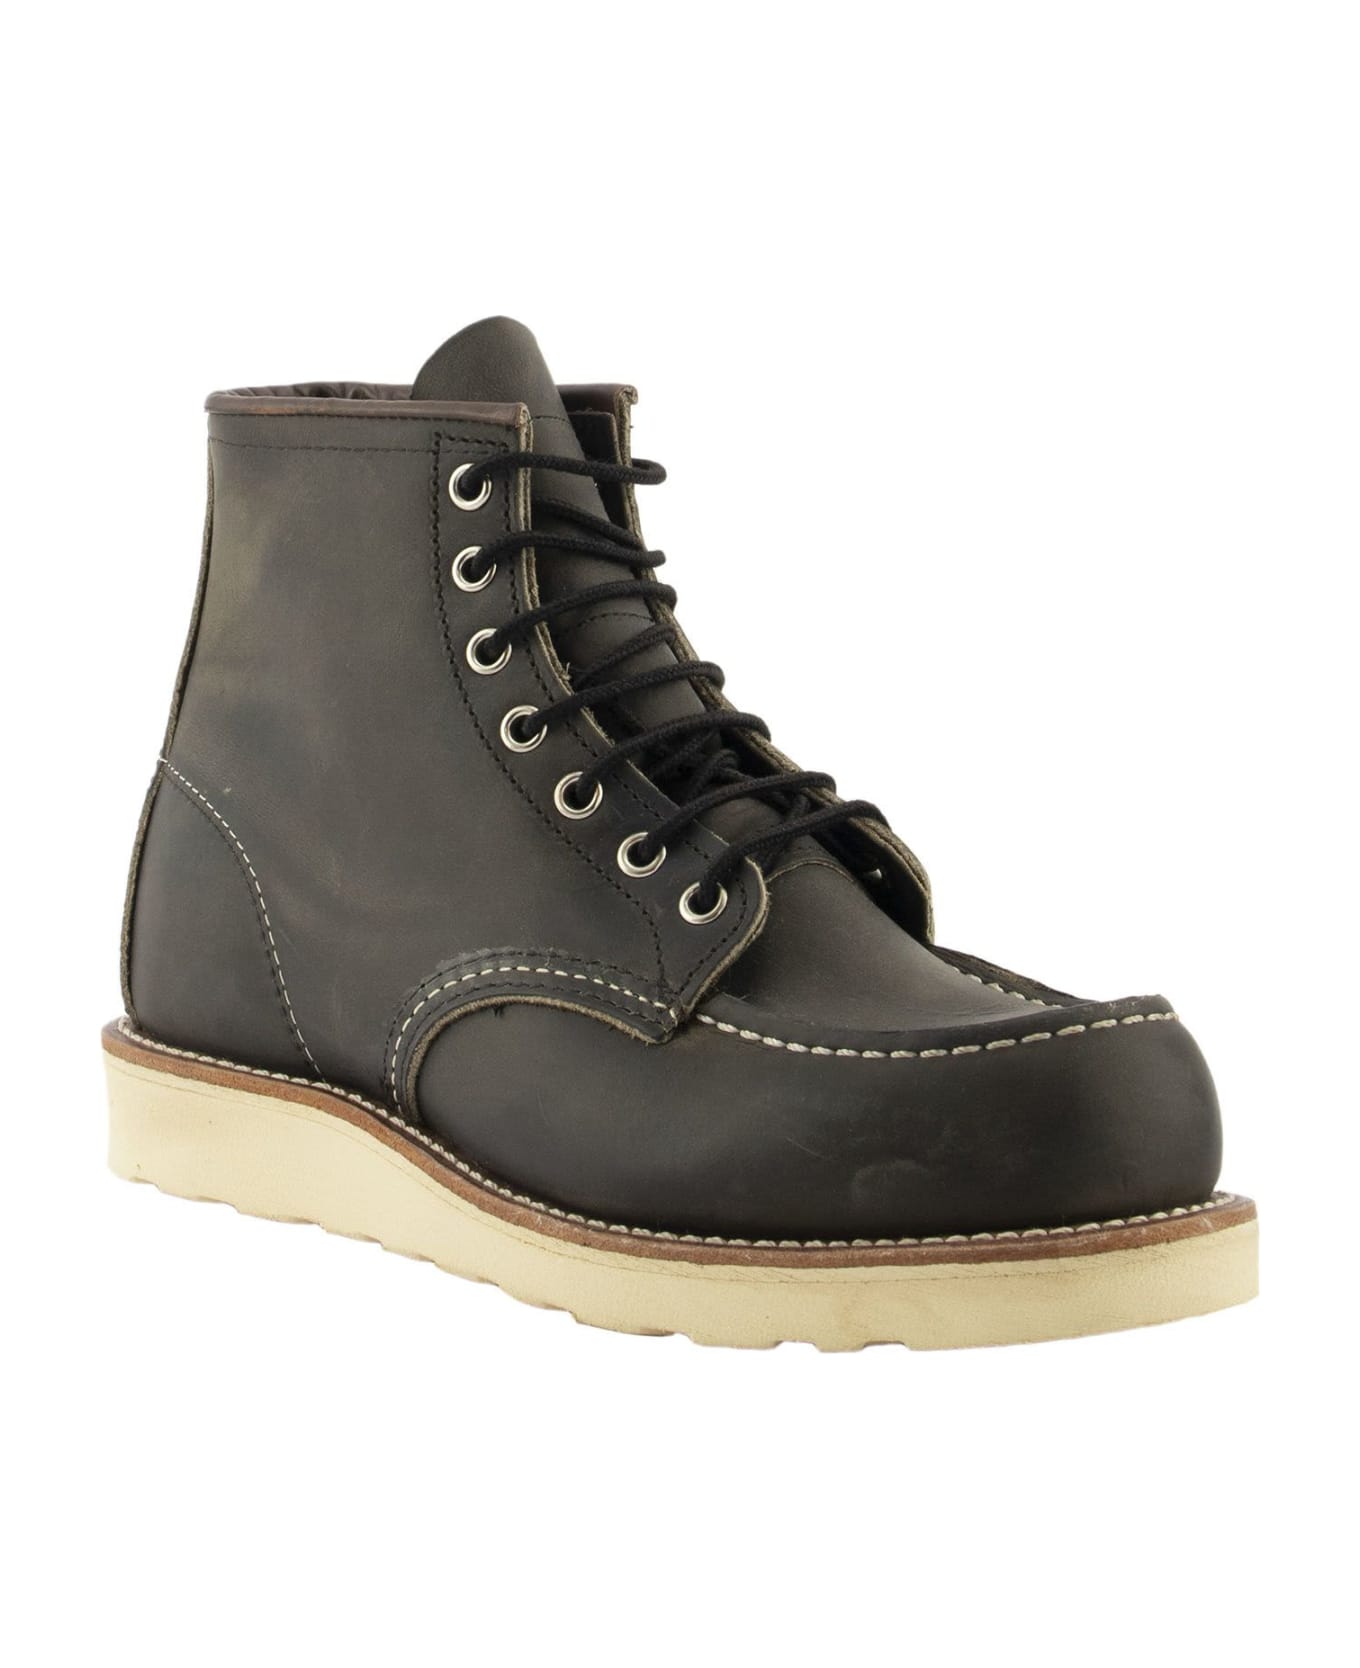 Red Wing Classic Moc - Rough And Tough Leather Boot - Charcoal ブーツ